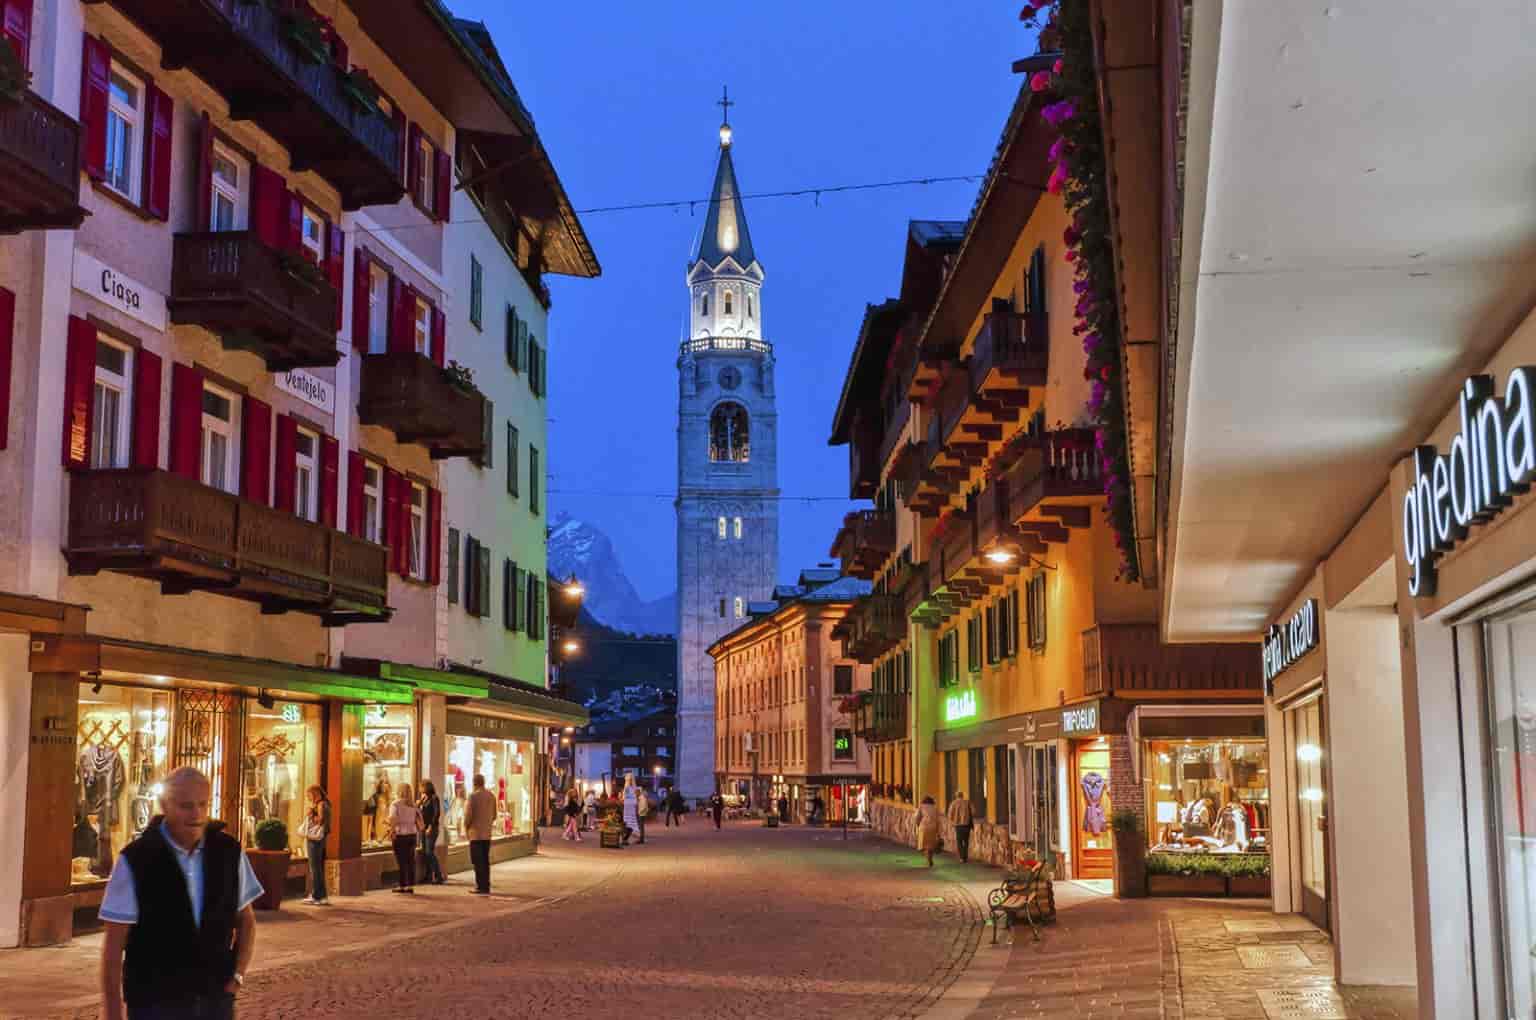 Enjoy the villages and shopping at night